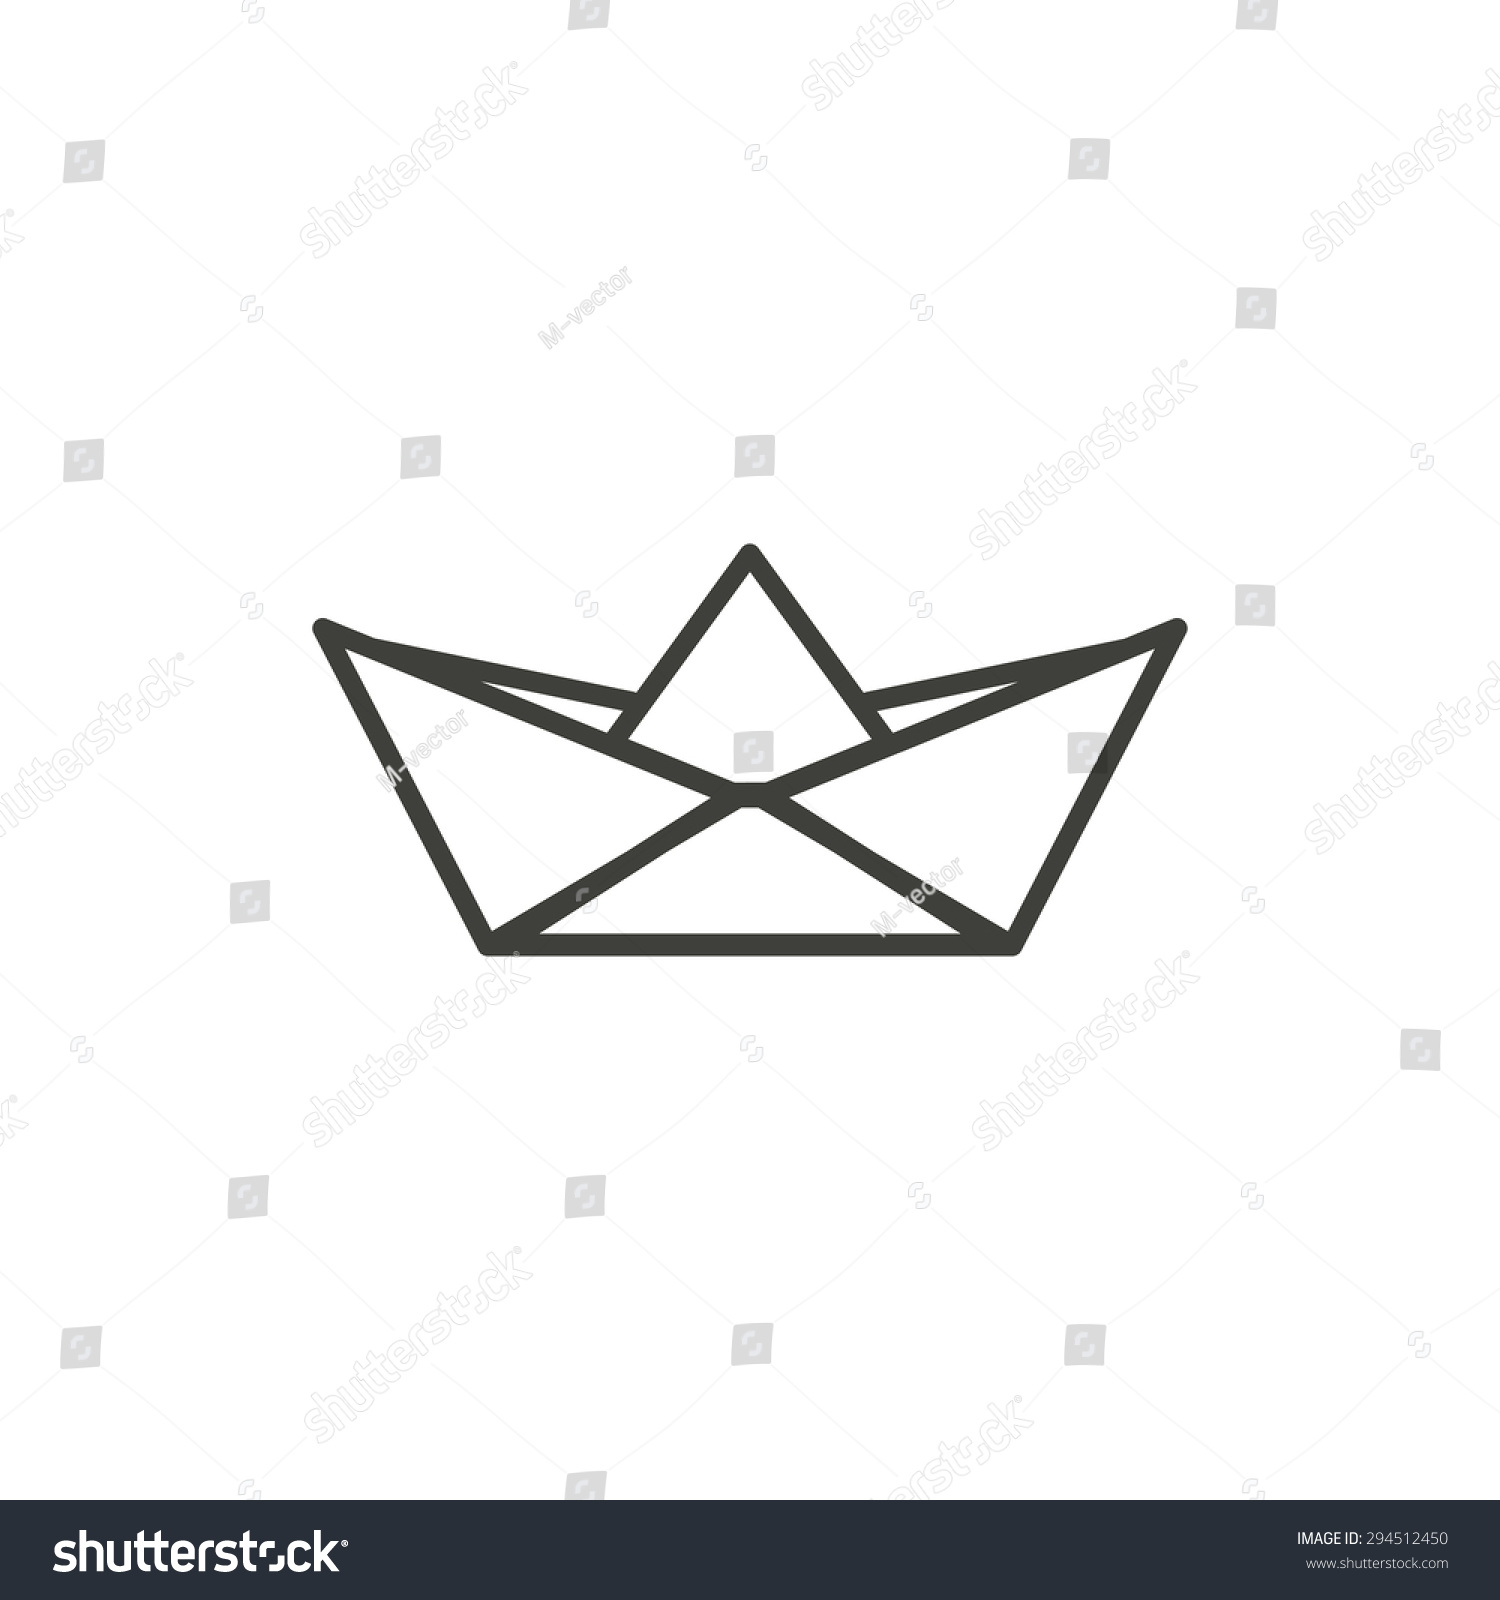 paper boat clipart - photo #15